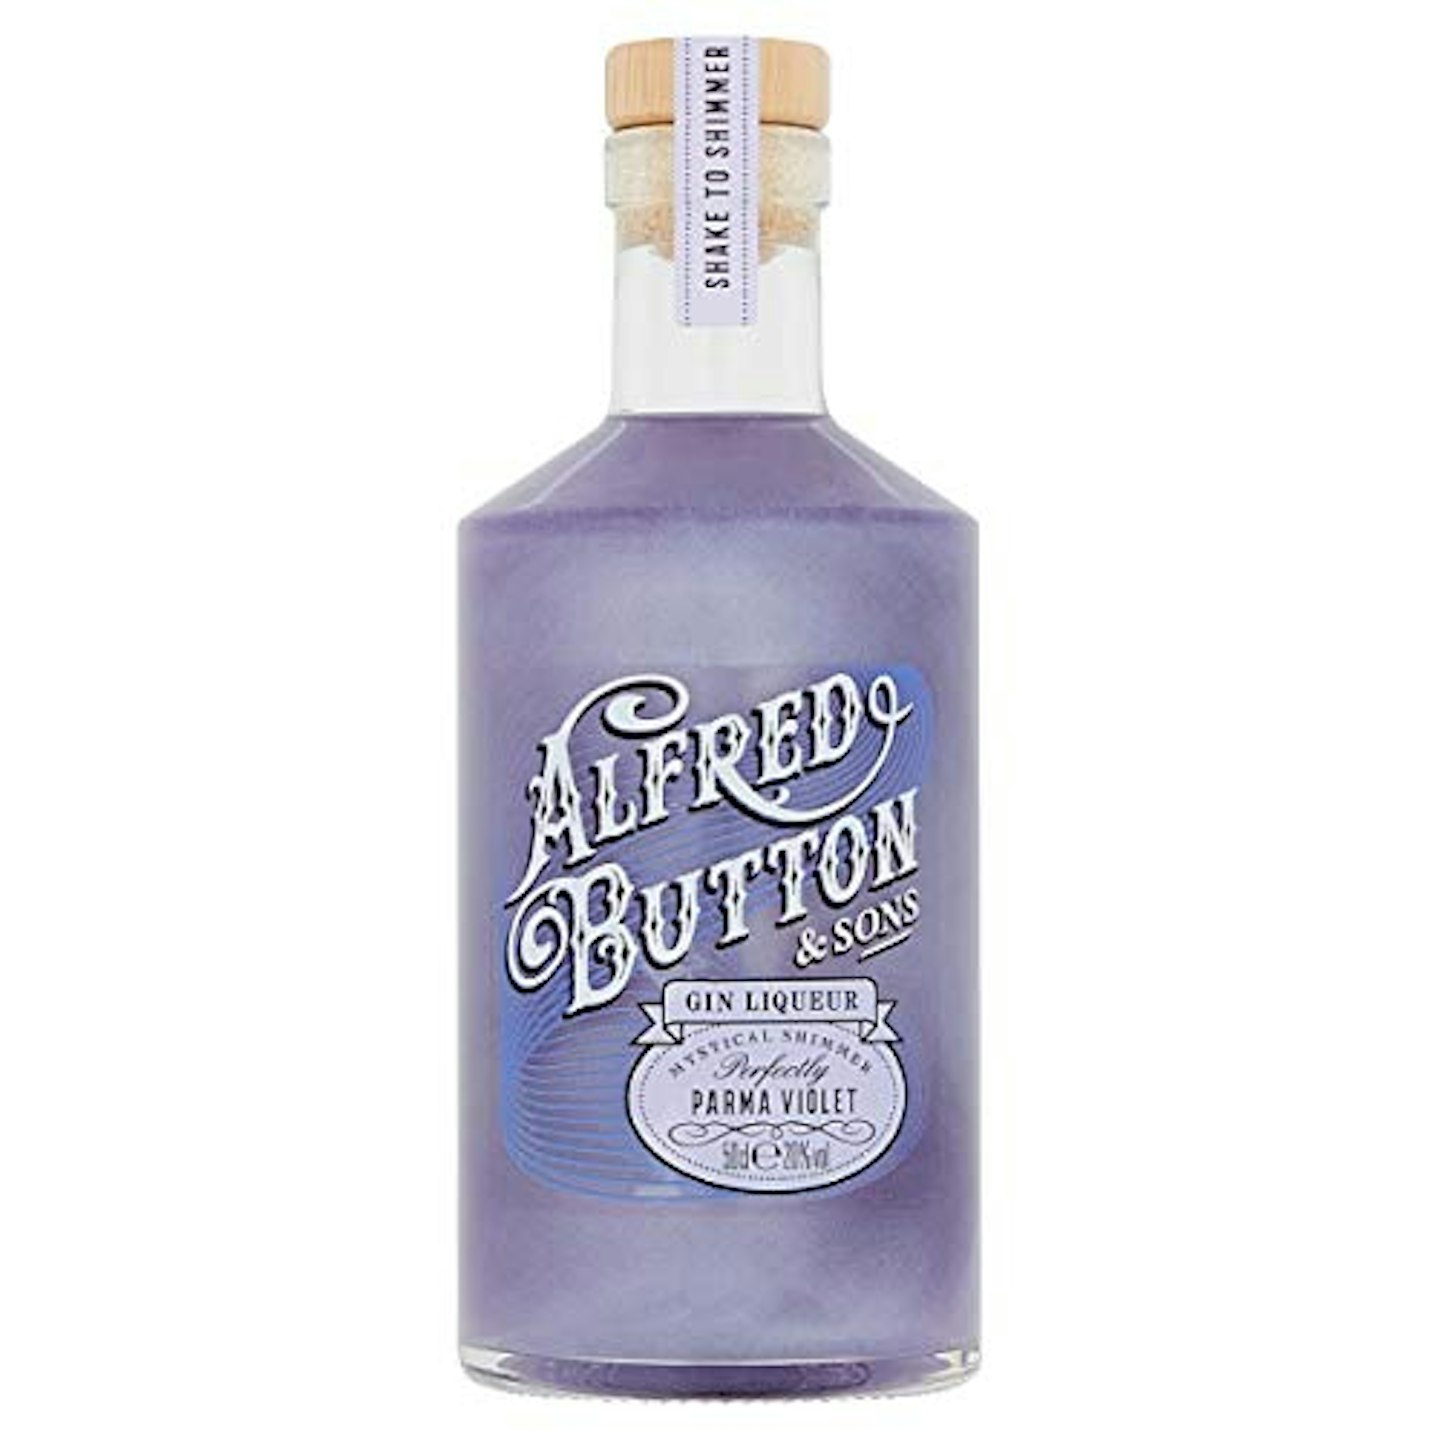 Alfred Button Gin Liqueur Perfectly Parma Violet, 16.95